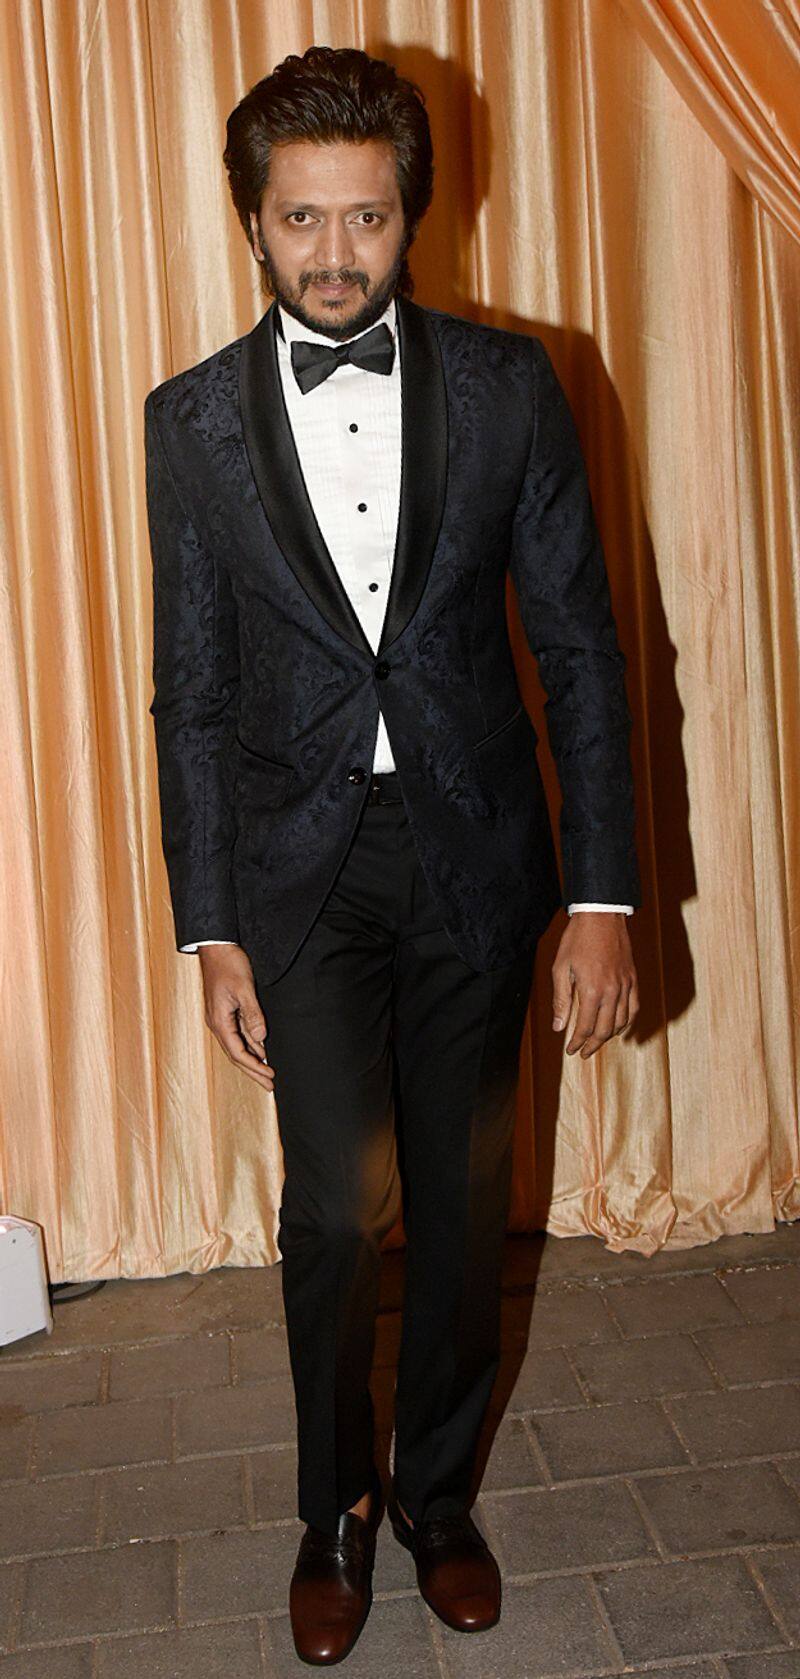 Riteish Deshmukh poses solo for the paps in his tuxedo look.